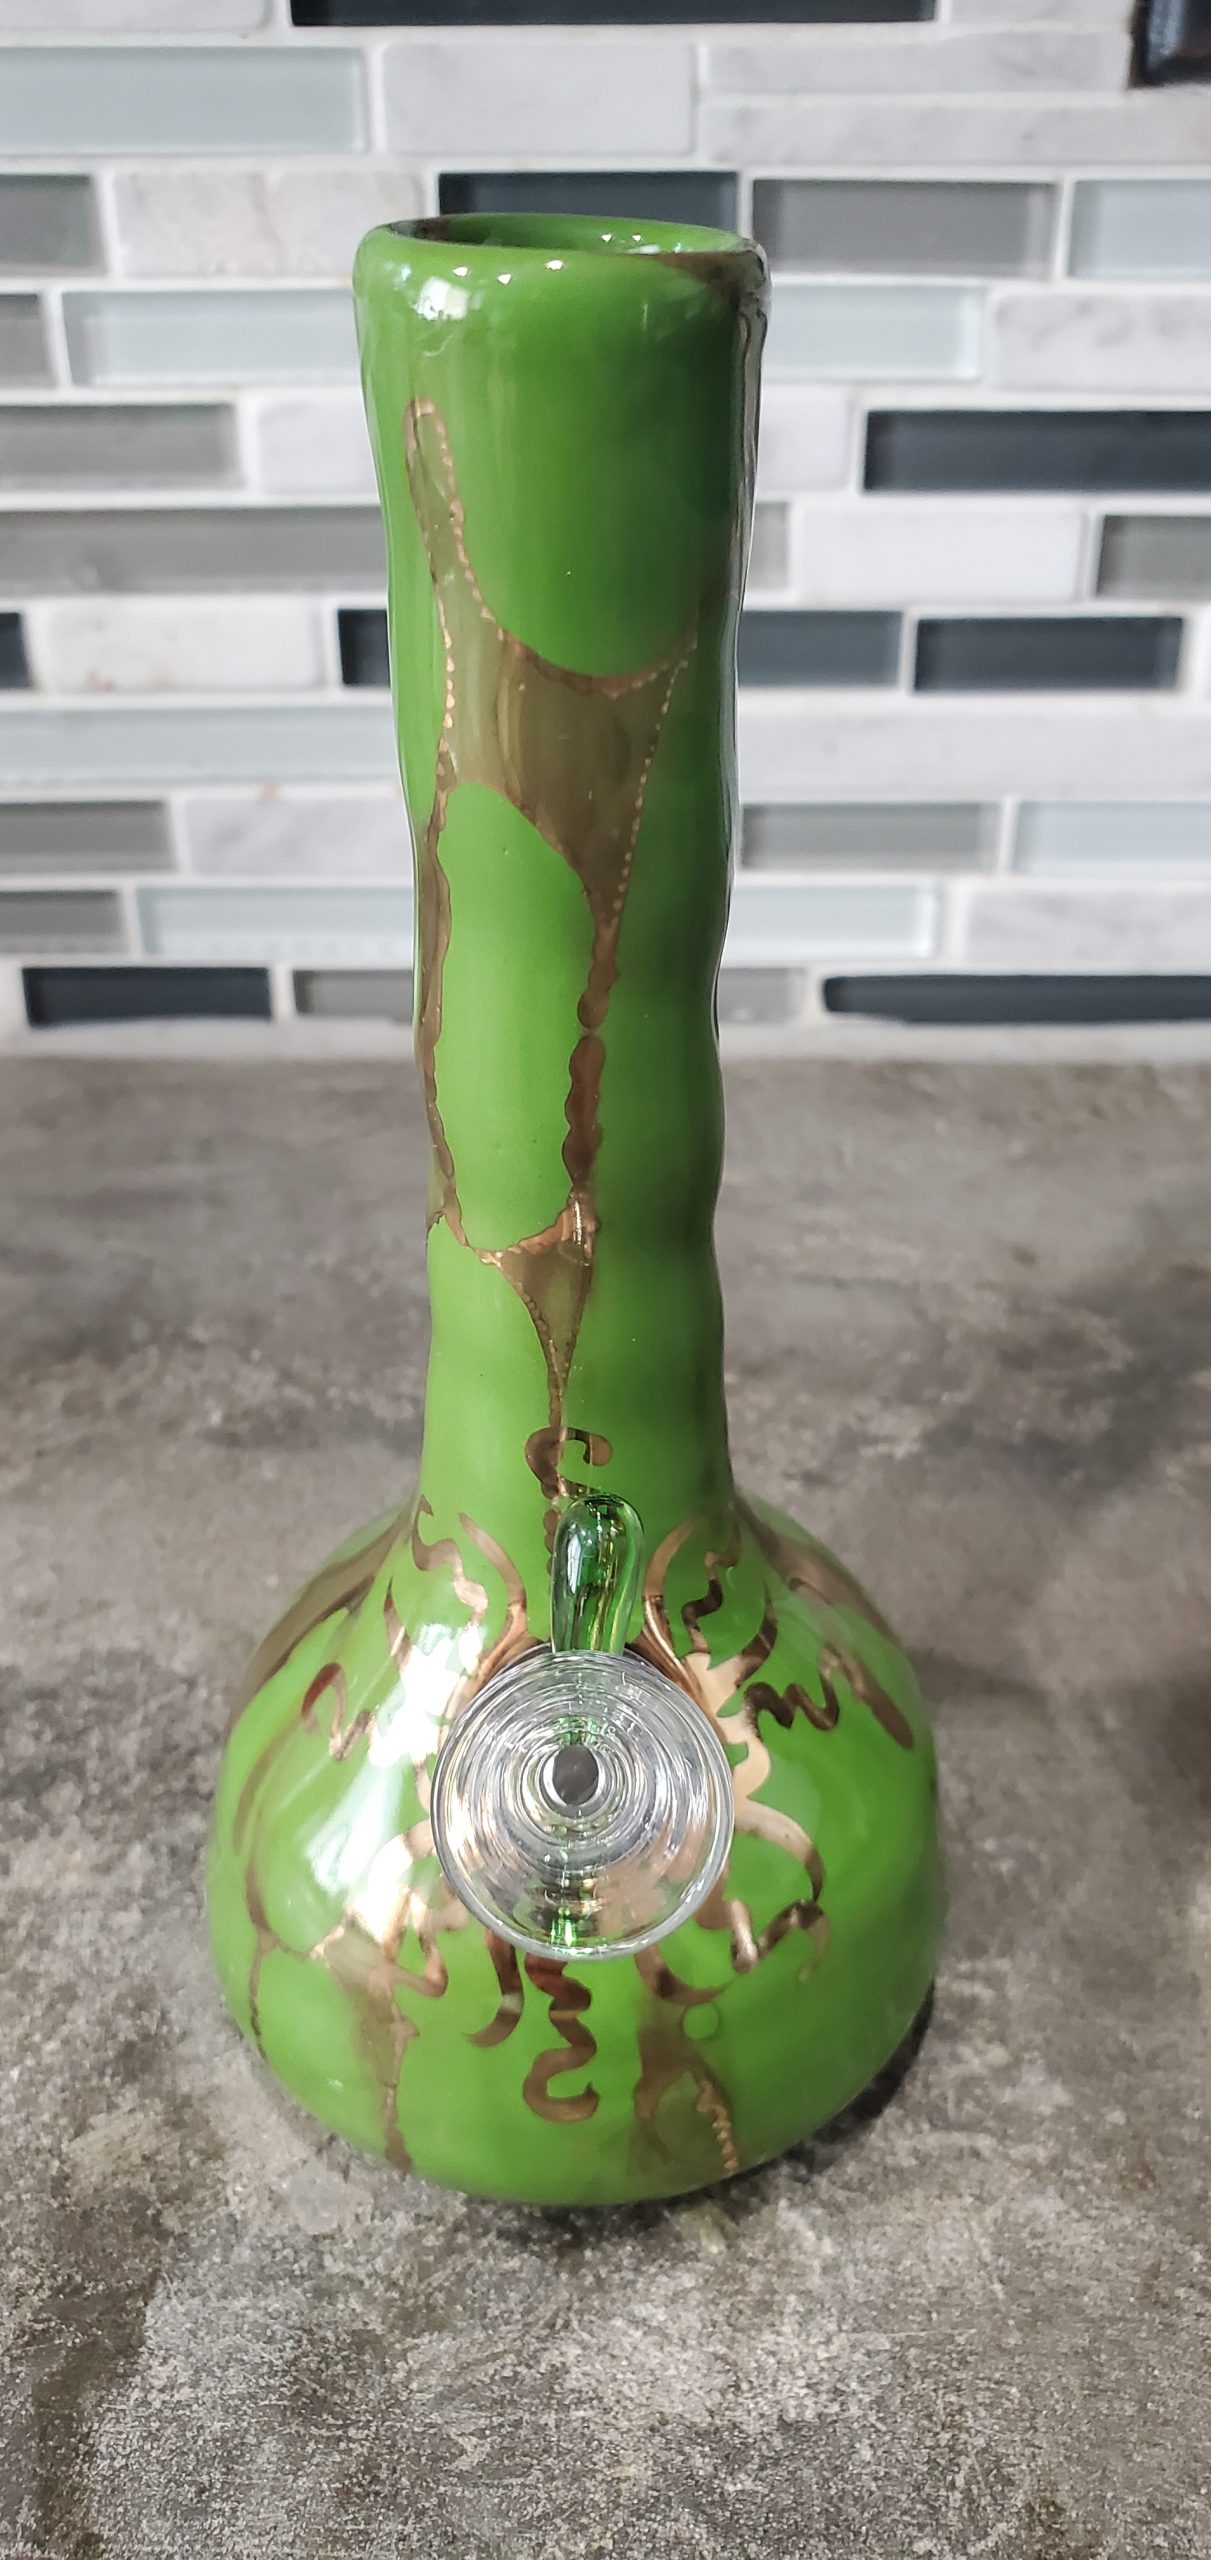 Medible review Ancient Creations bong 3 scaled